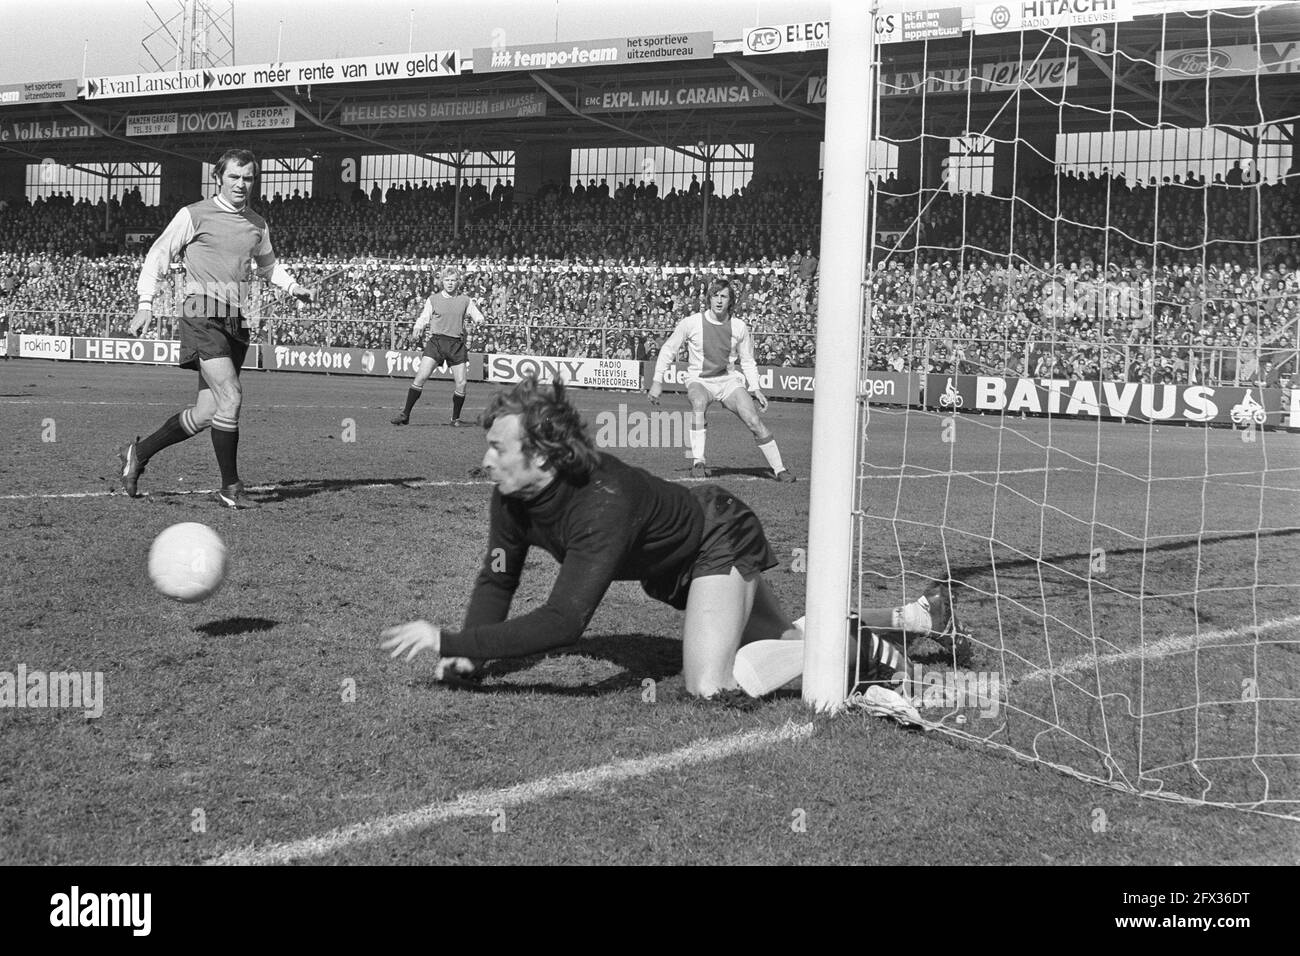 Ajax against PSV 4-1, Van Beveren in action, left Pleun Strik, March 12, 1972, sports, soccer, The Netherlands, 20th century press agency photo, news to remember, documentary, historic photography 1945-1990, visual stories, human history of the Twentieth Century, capturing moments in time Stock Photo